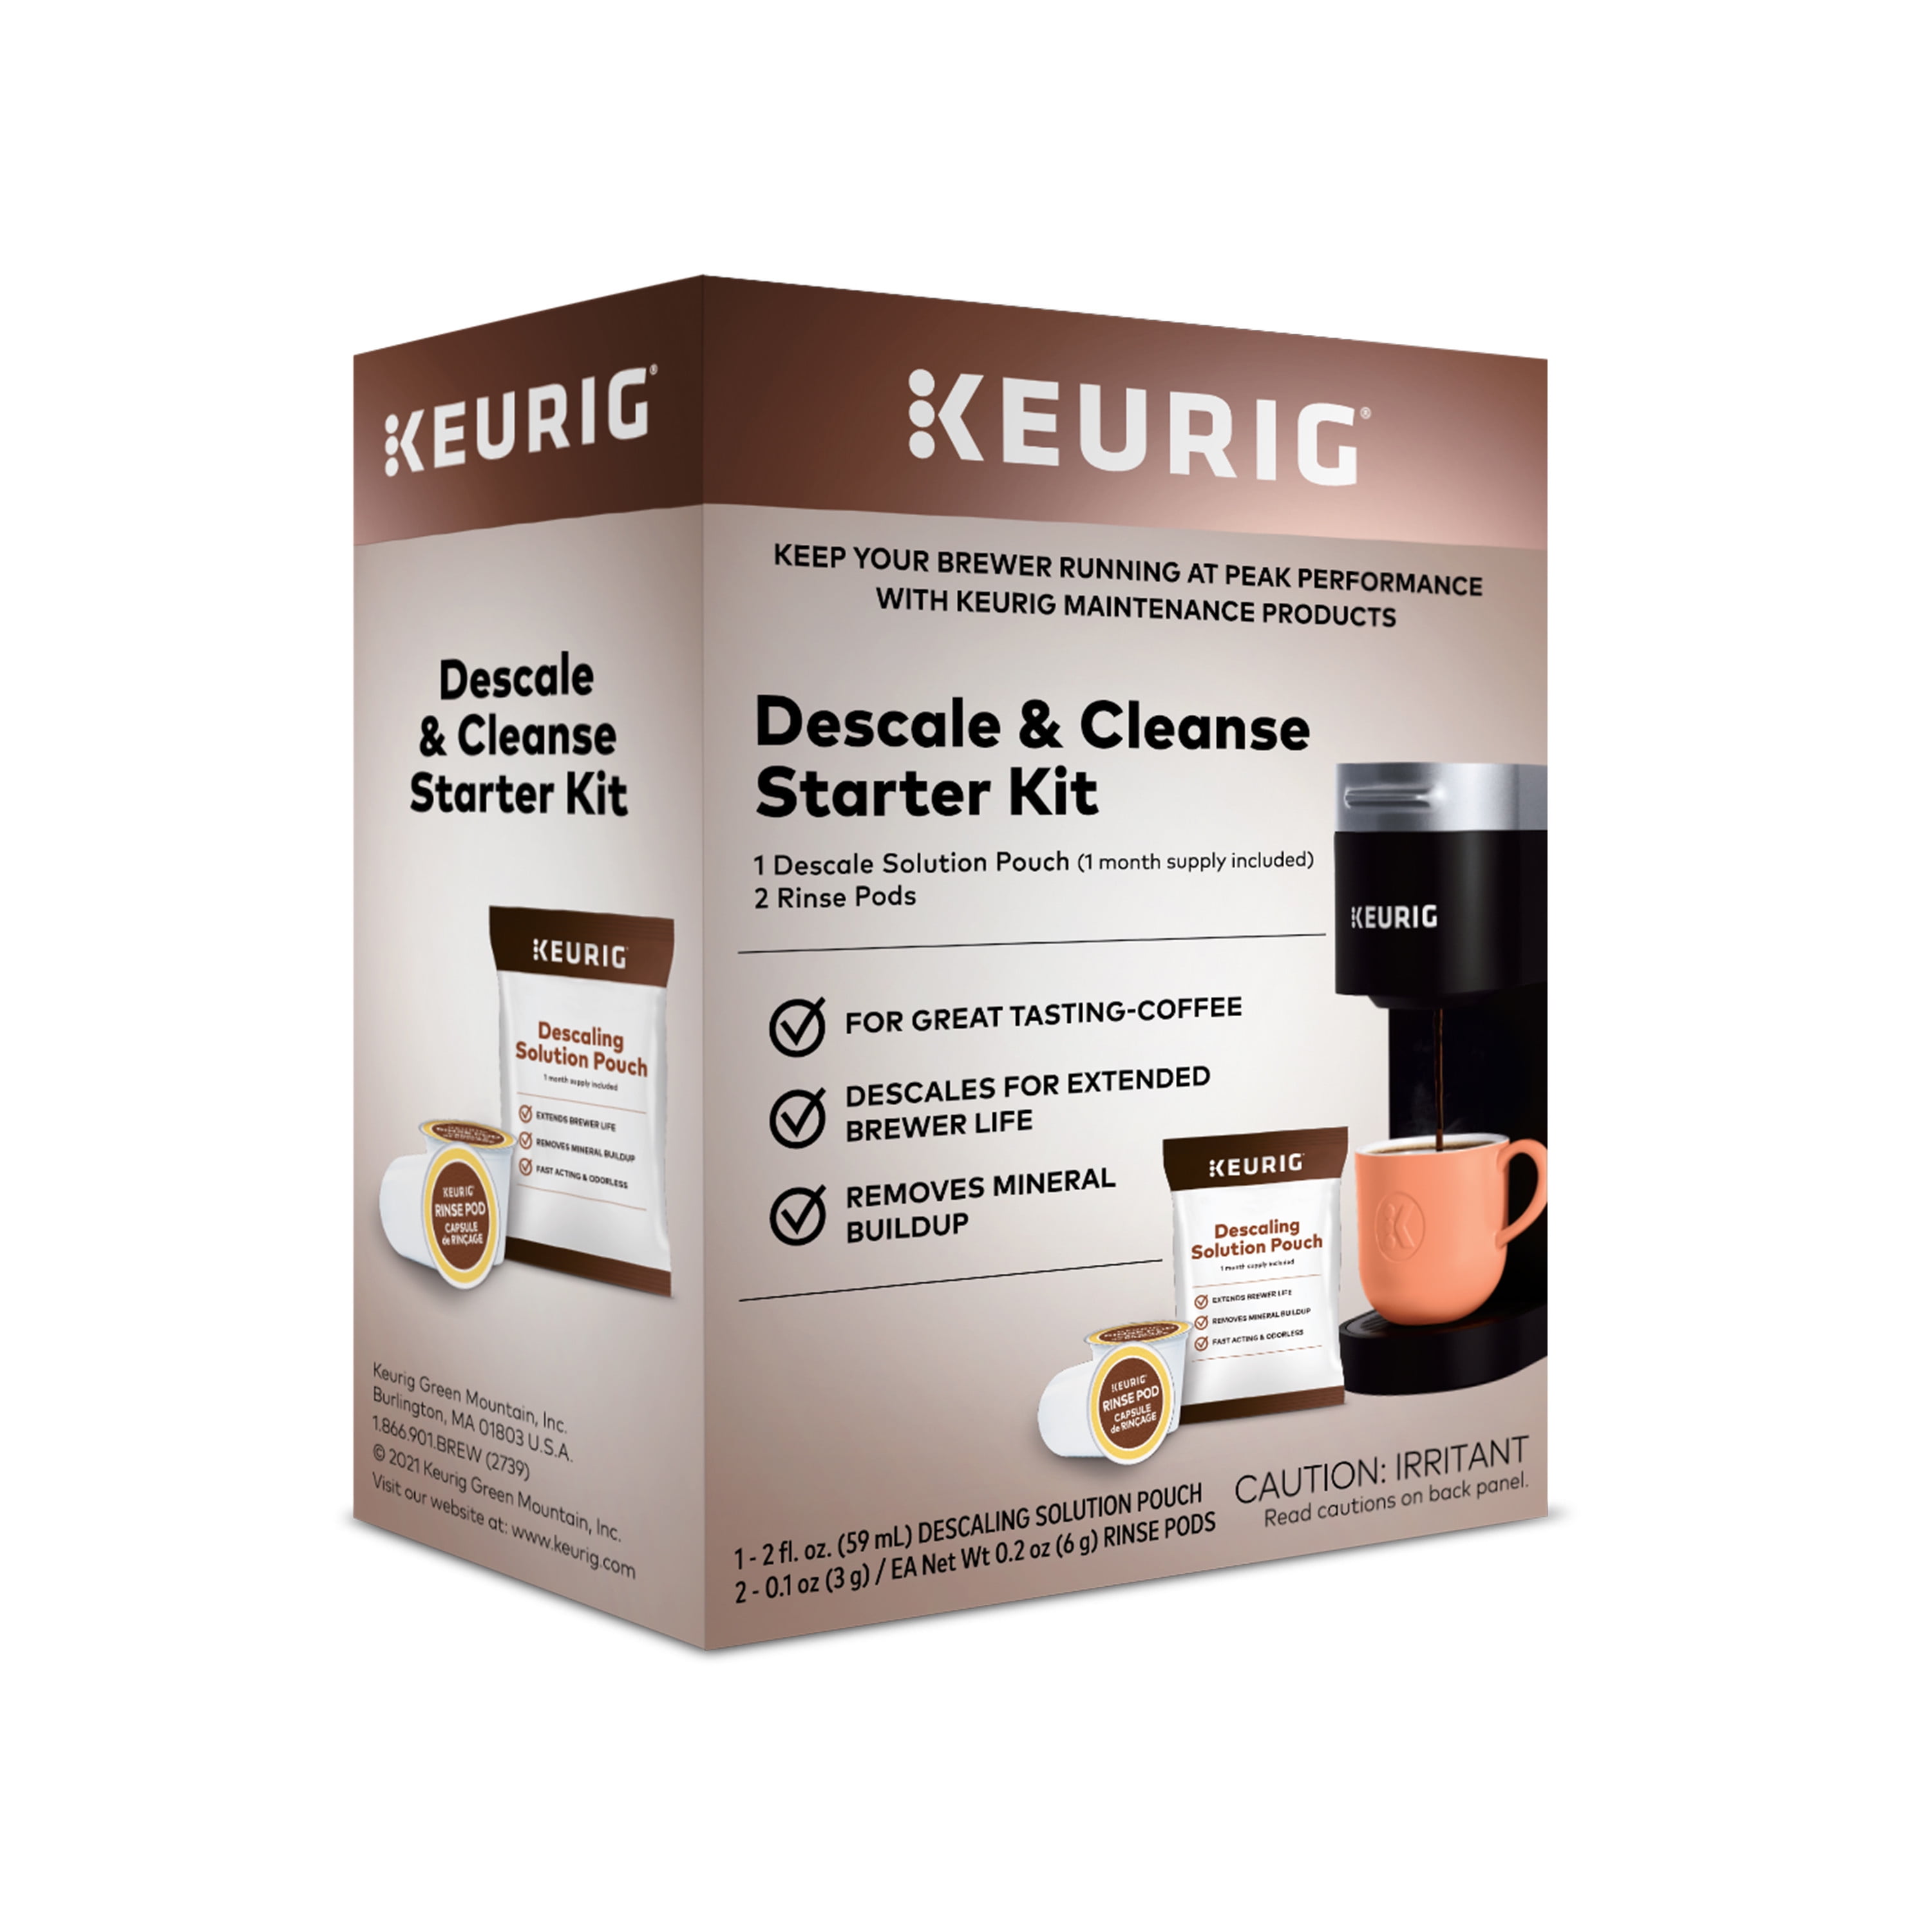 How to Clean and Descale a Keurig Mini